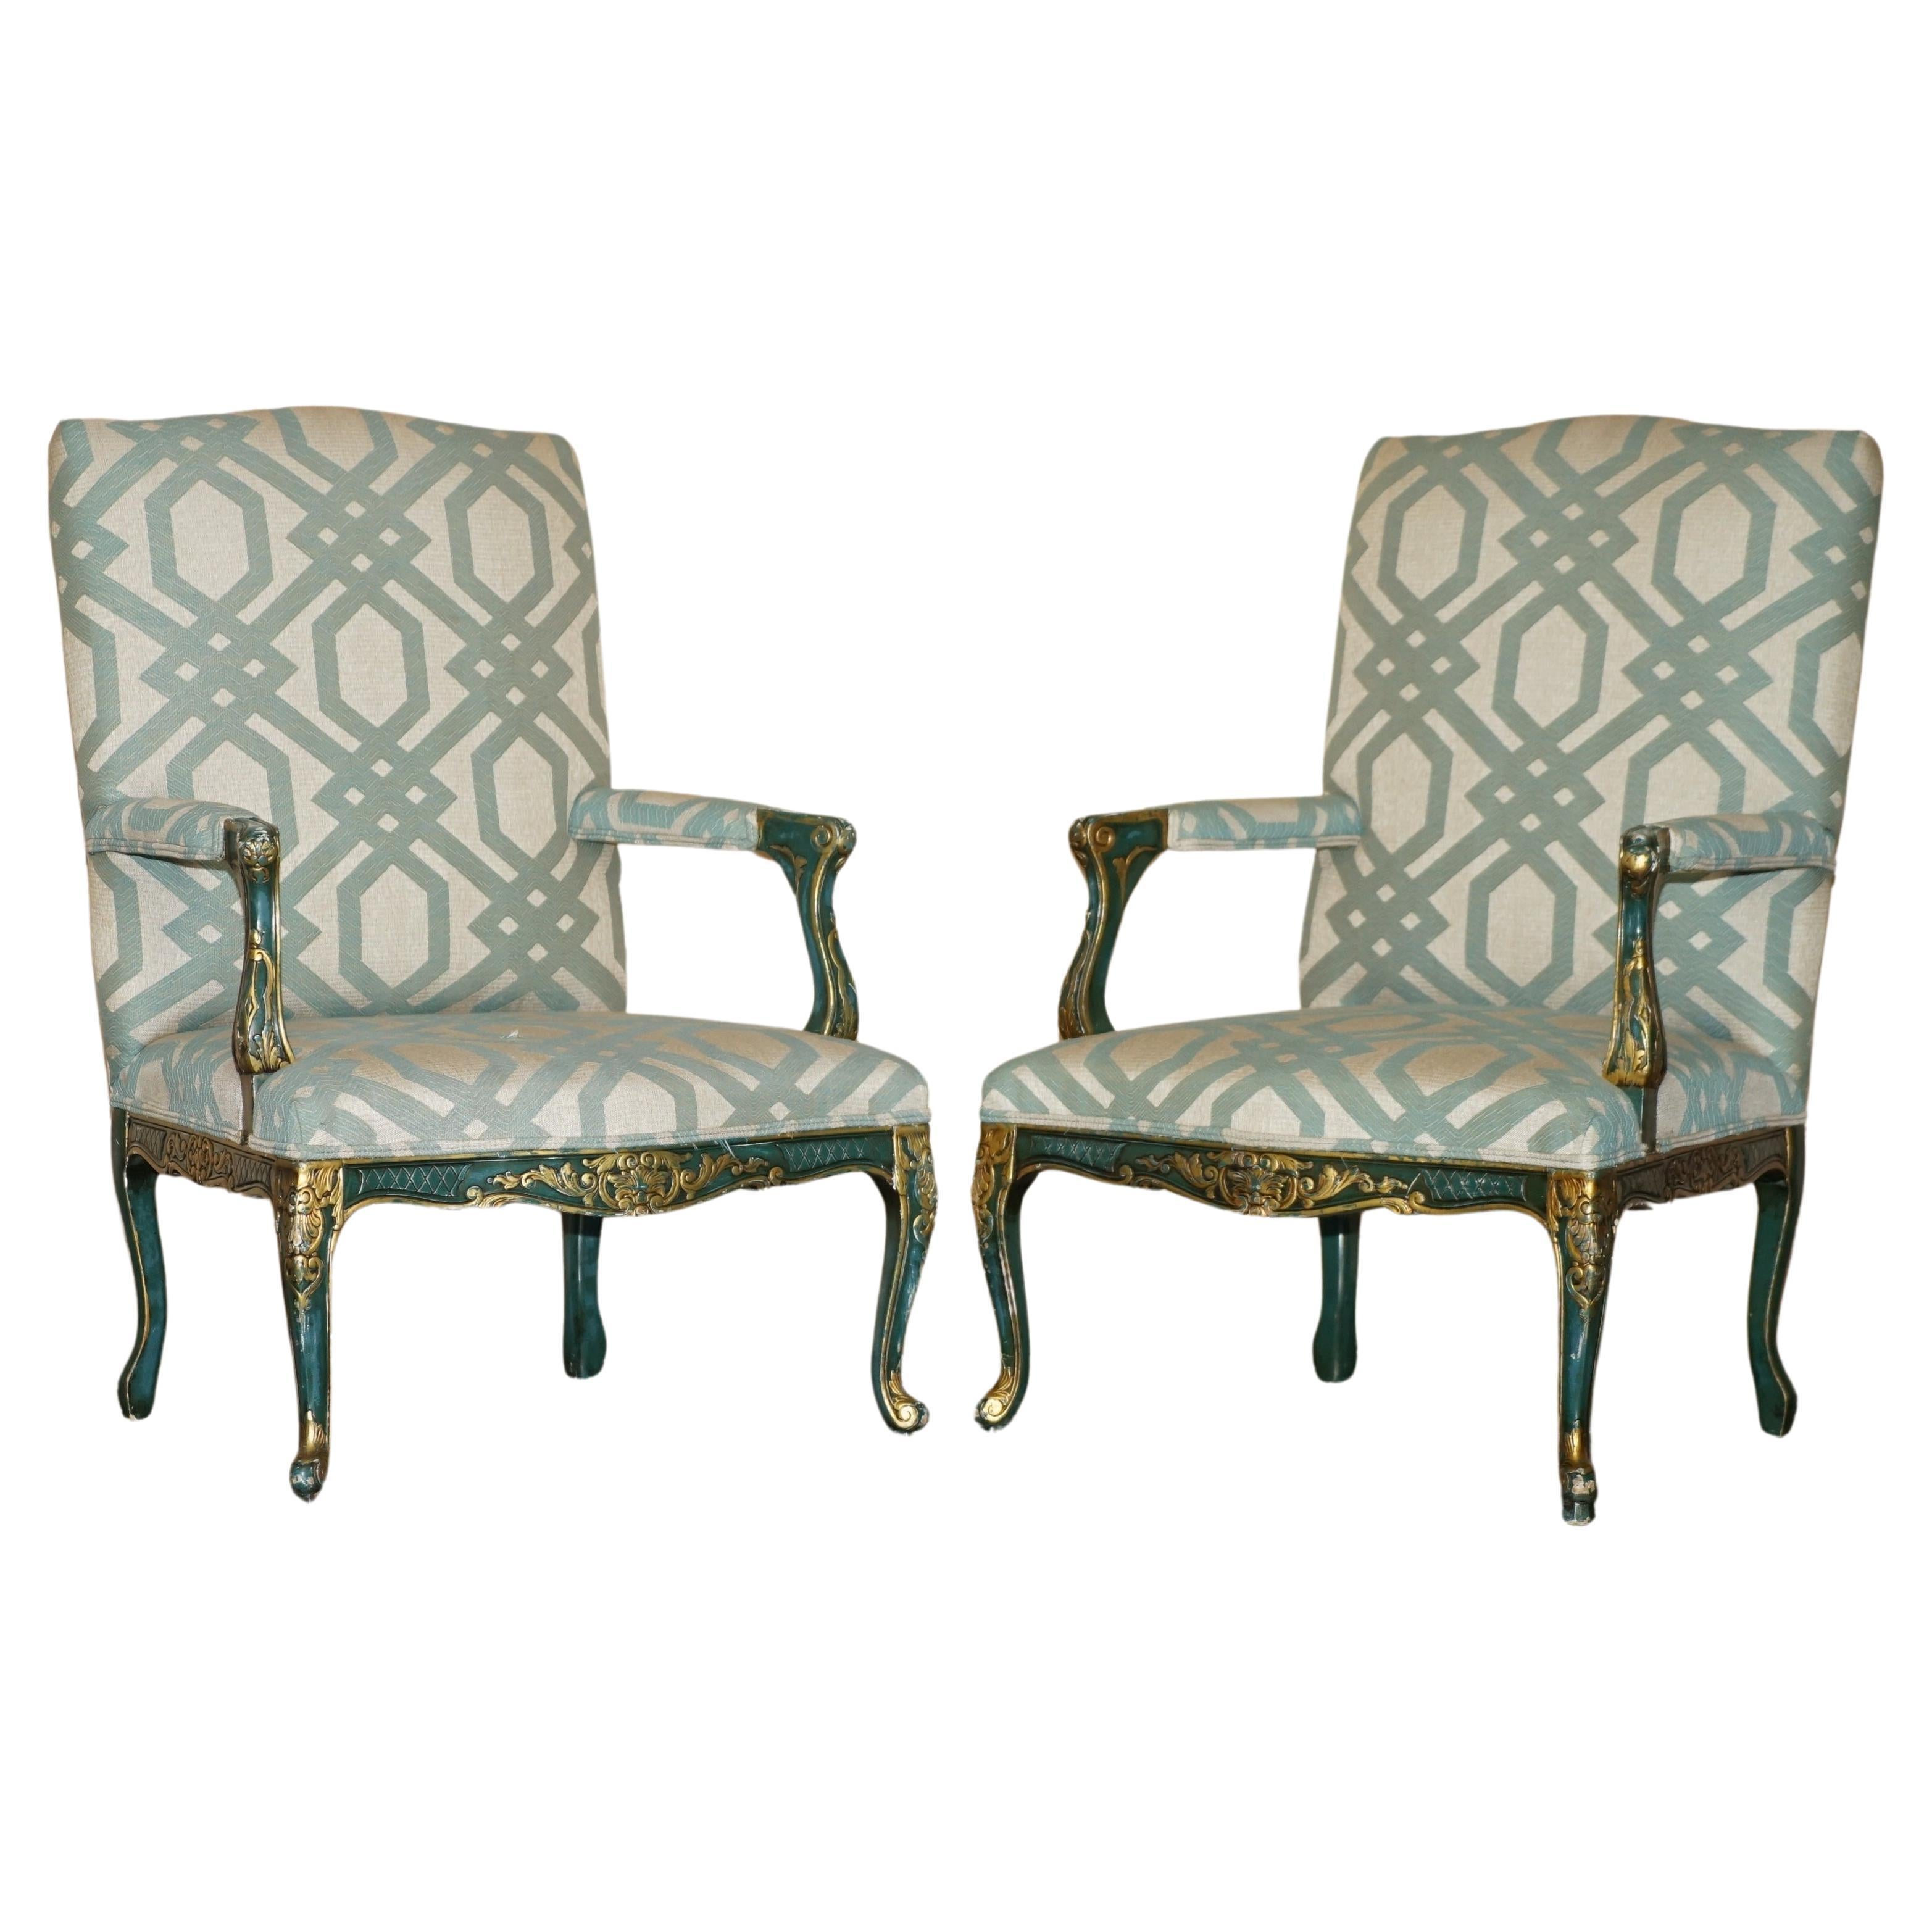 PAIR OF ViNTAGE PAINTED GREEN FRENCH FRATELLI ARMCHAIRS ORNATELY CARVED FRAMES For Sale